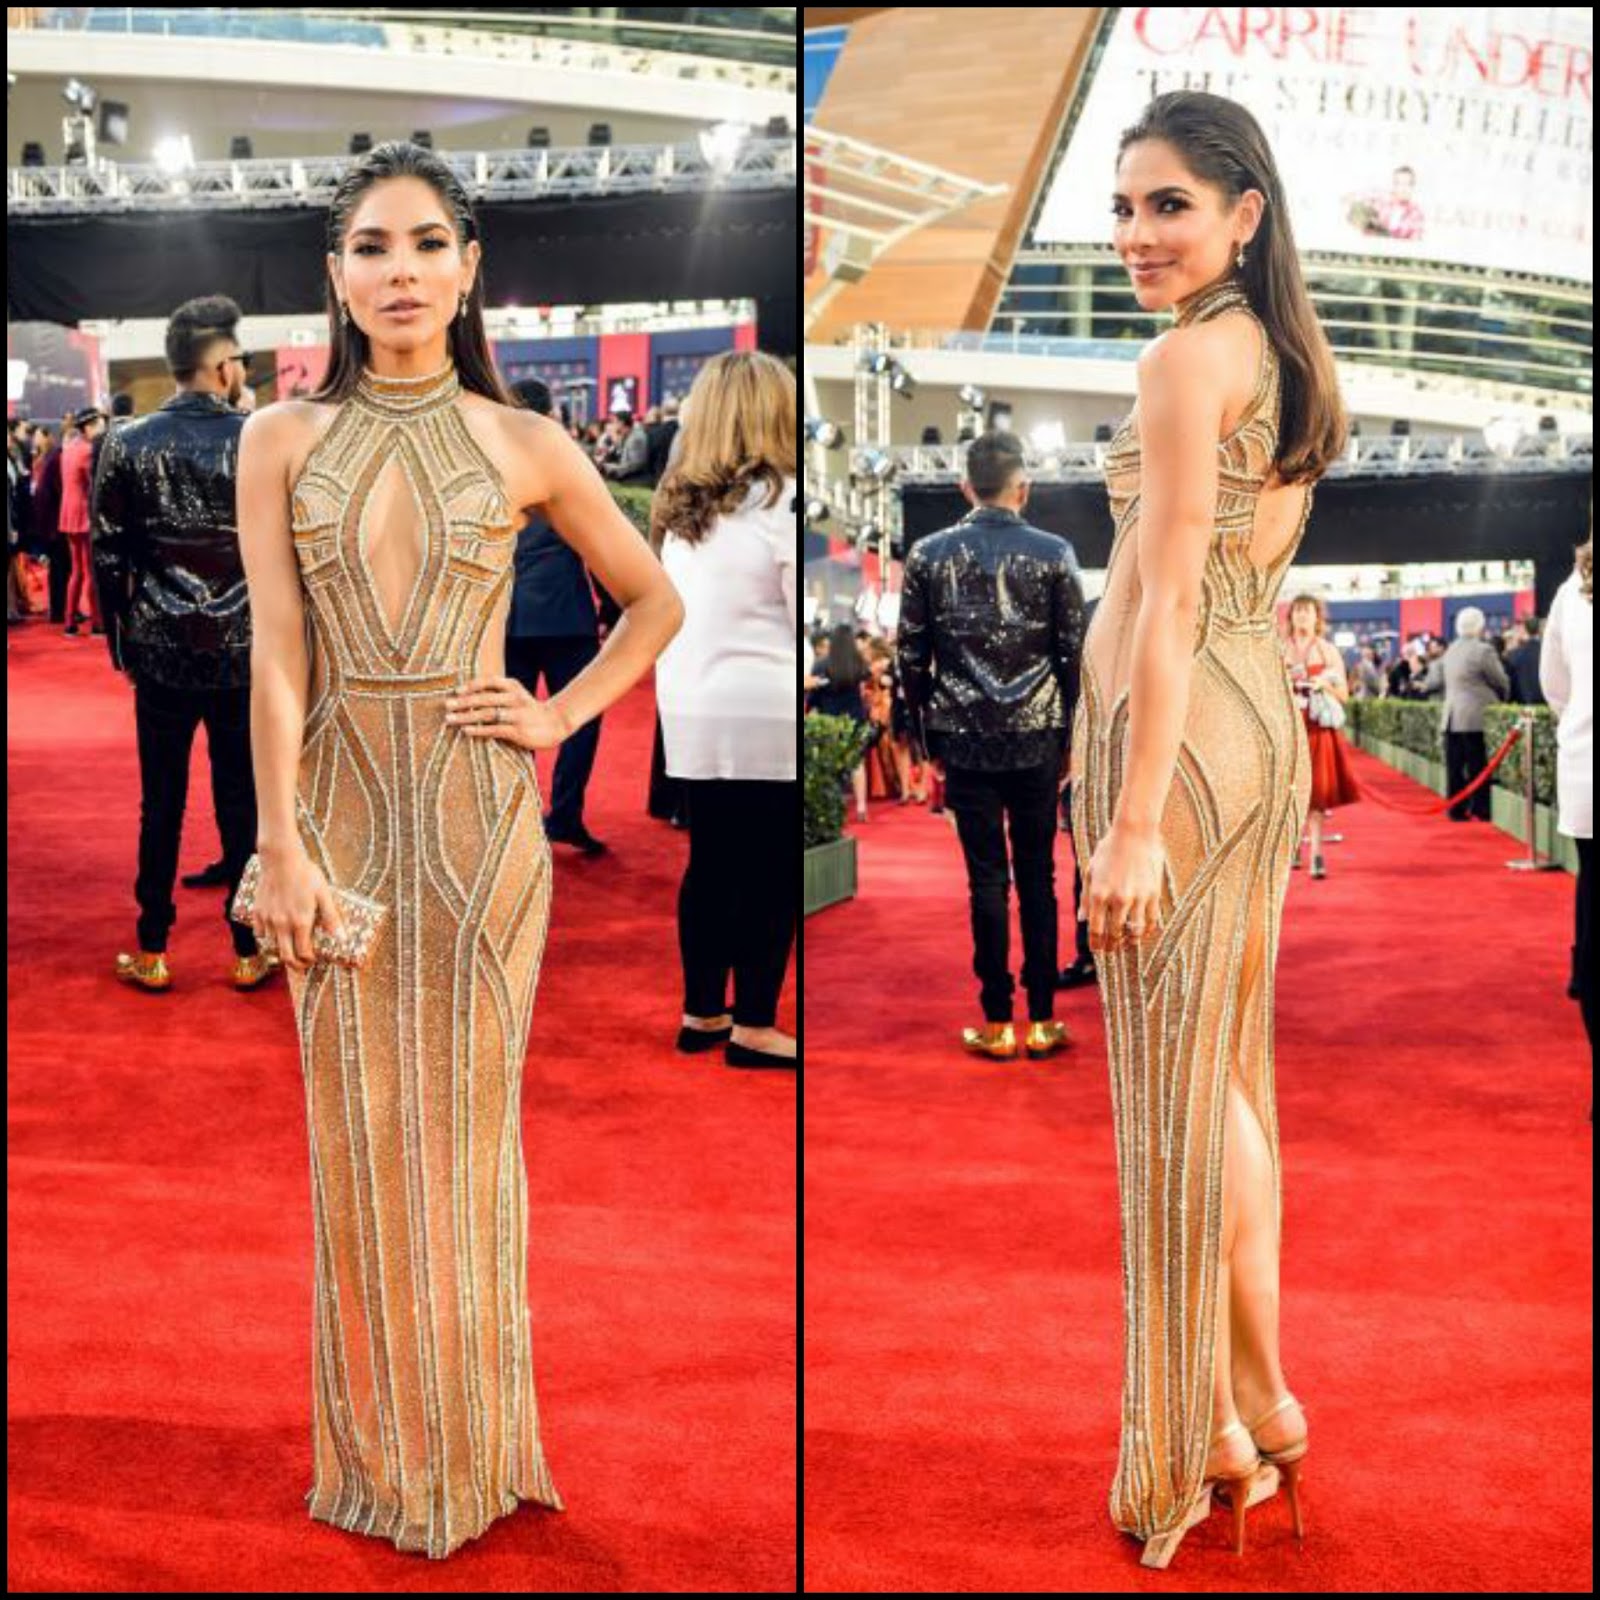 Nick Verreos: WHO WORE WHAT?.....2016 Latin Grammys Red Carpet